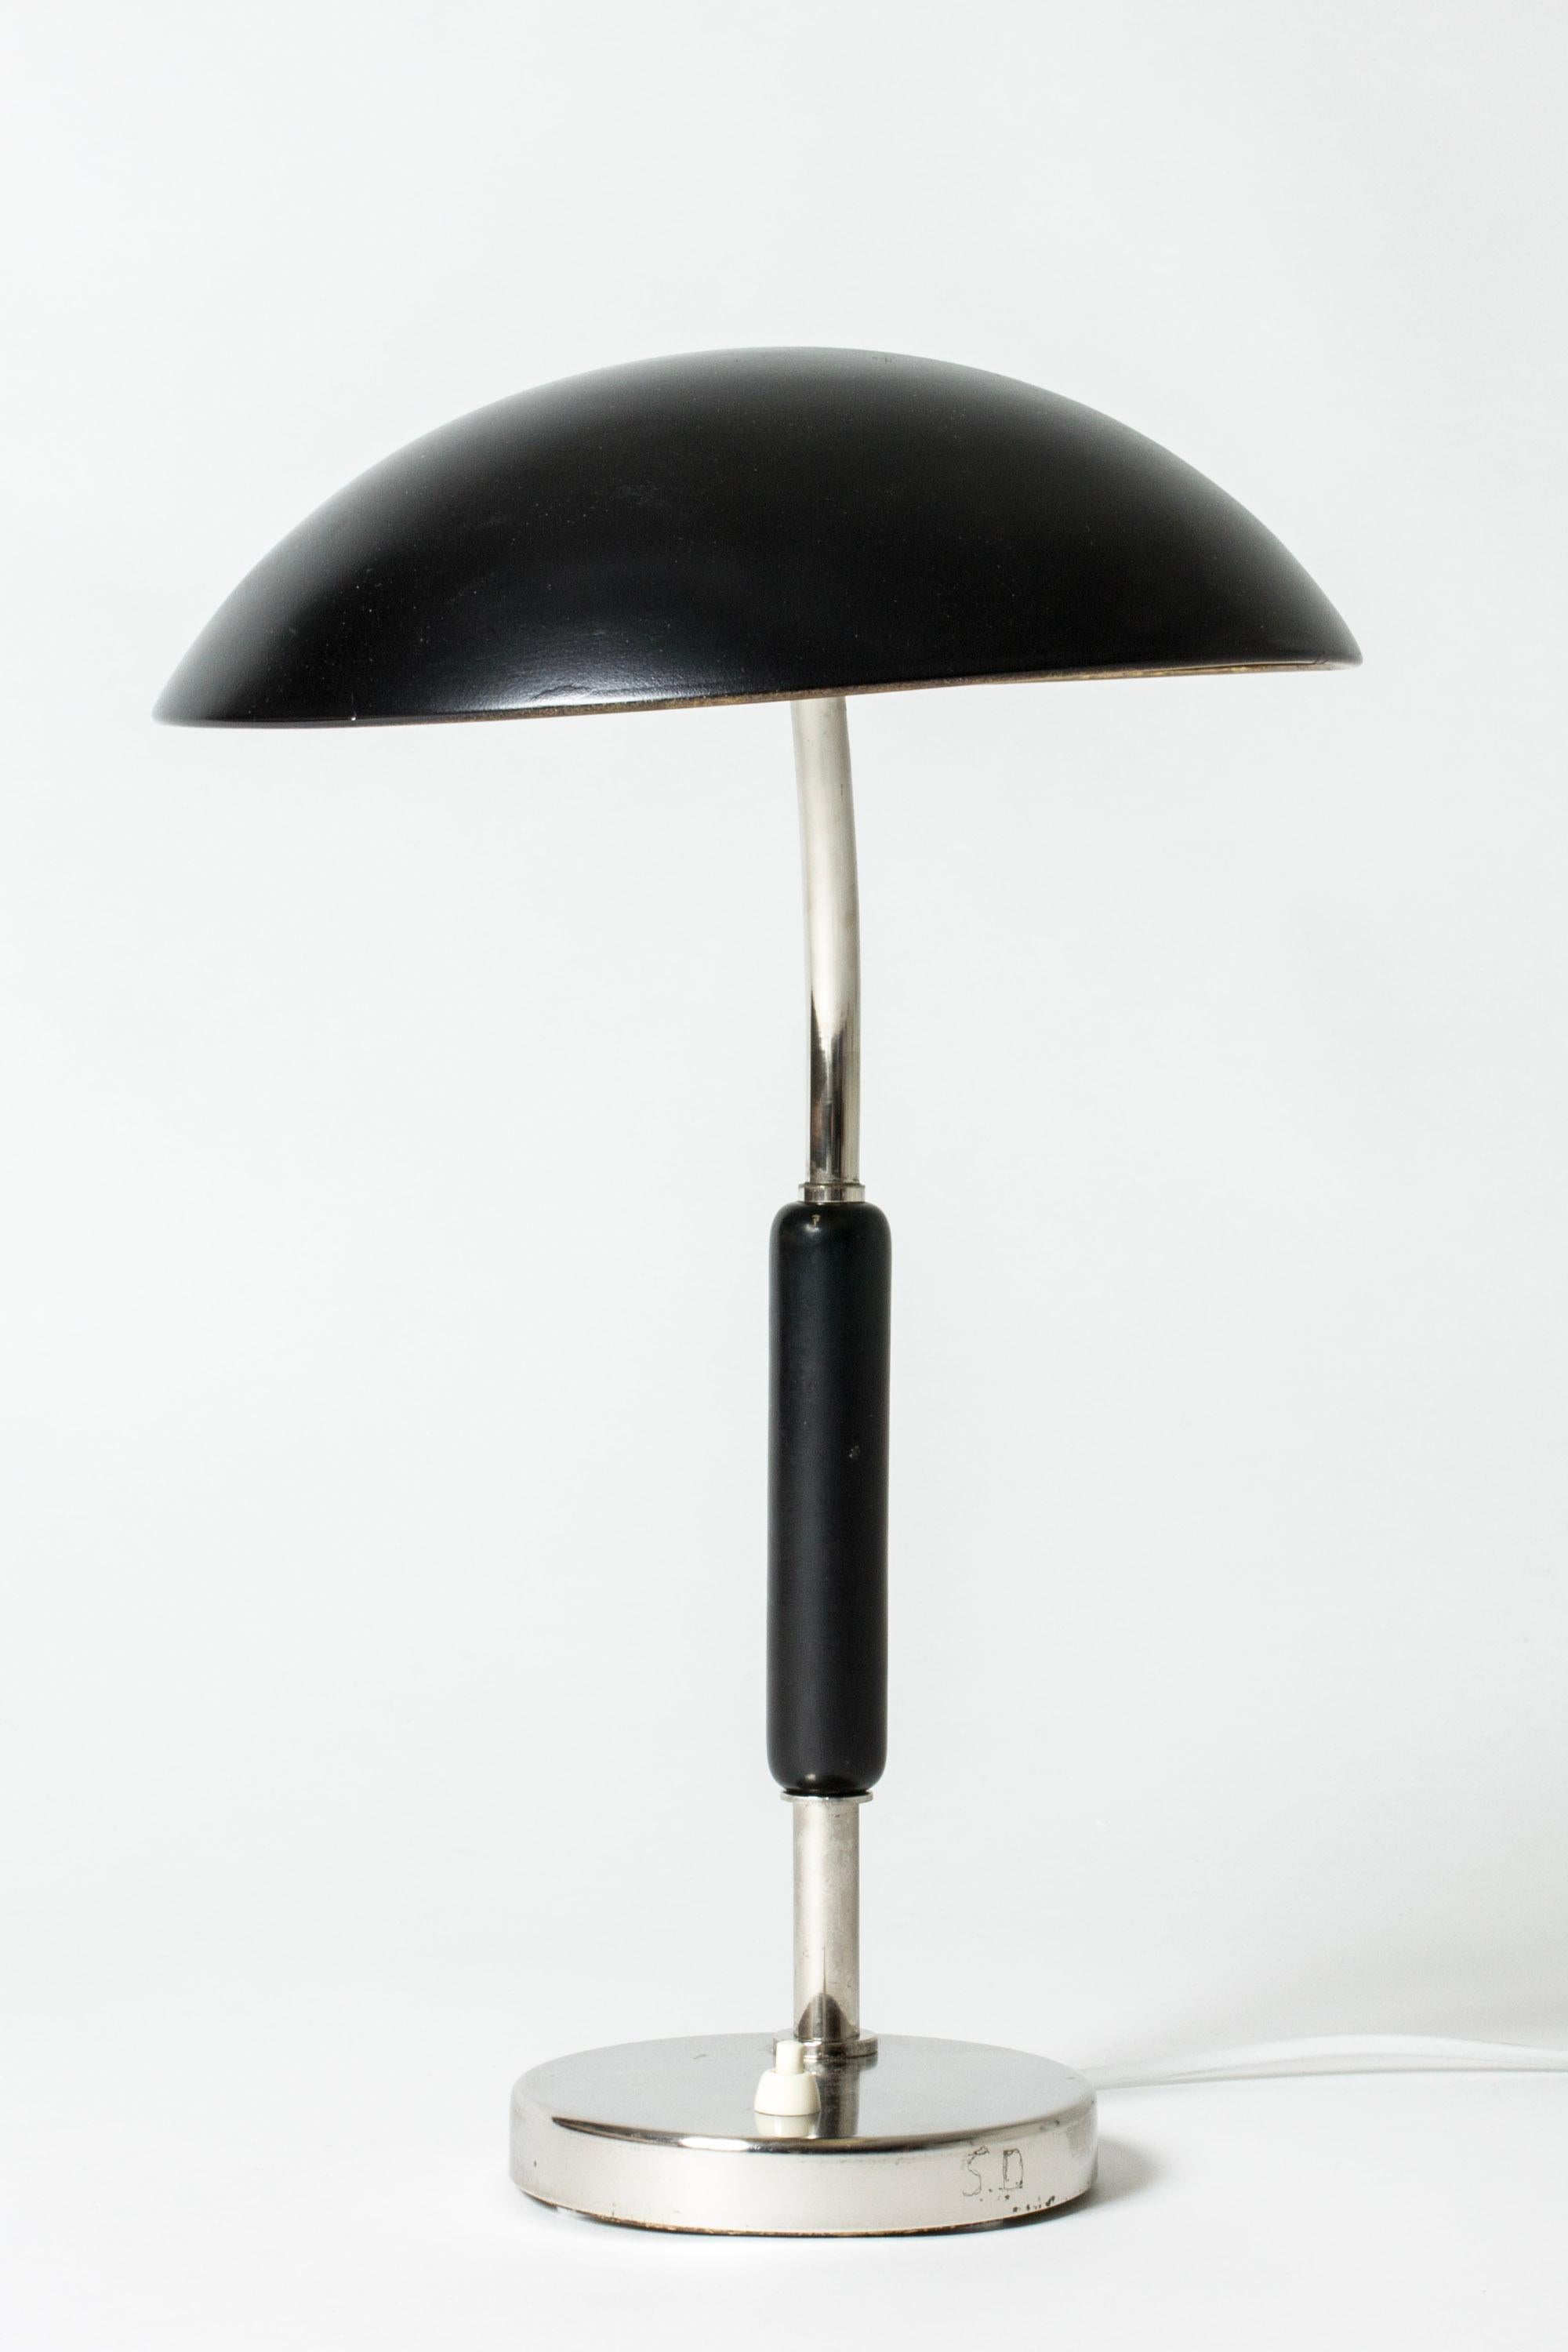 Mid-20th Century Vintage Functionalist Table or Desk Lamp from ASEA, Sweden, 1930s For Sale